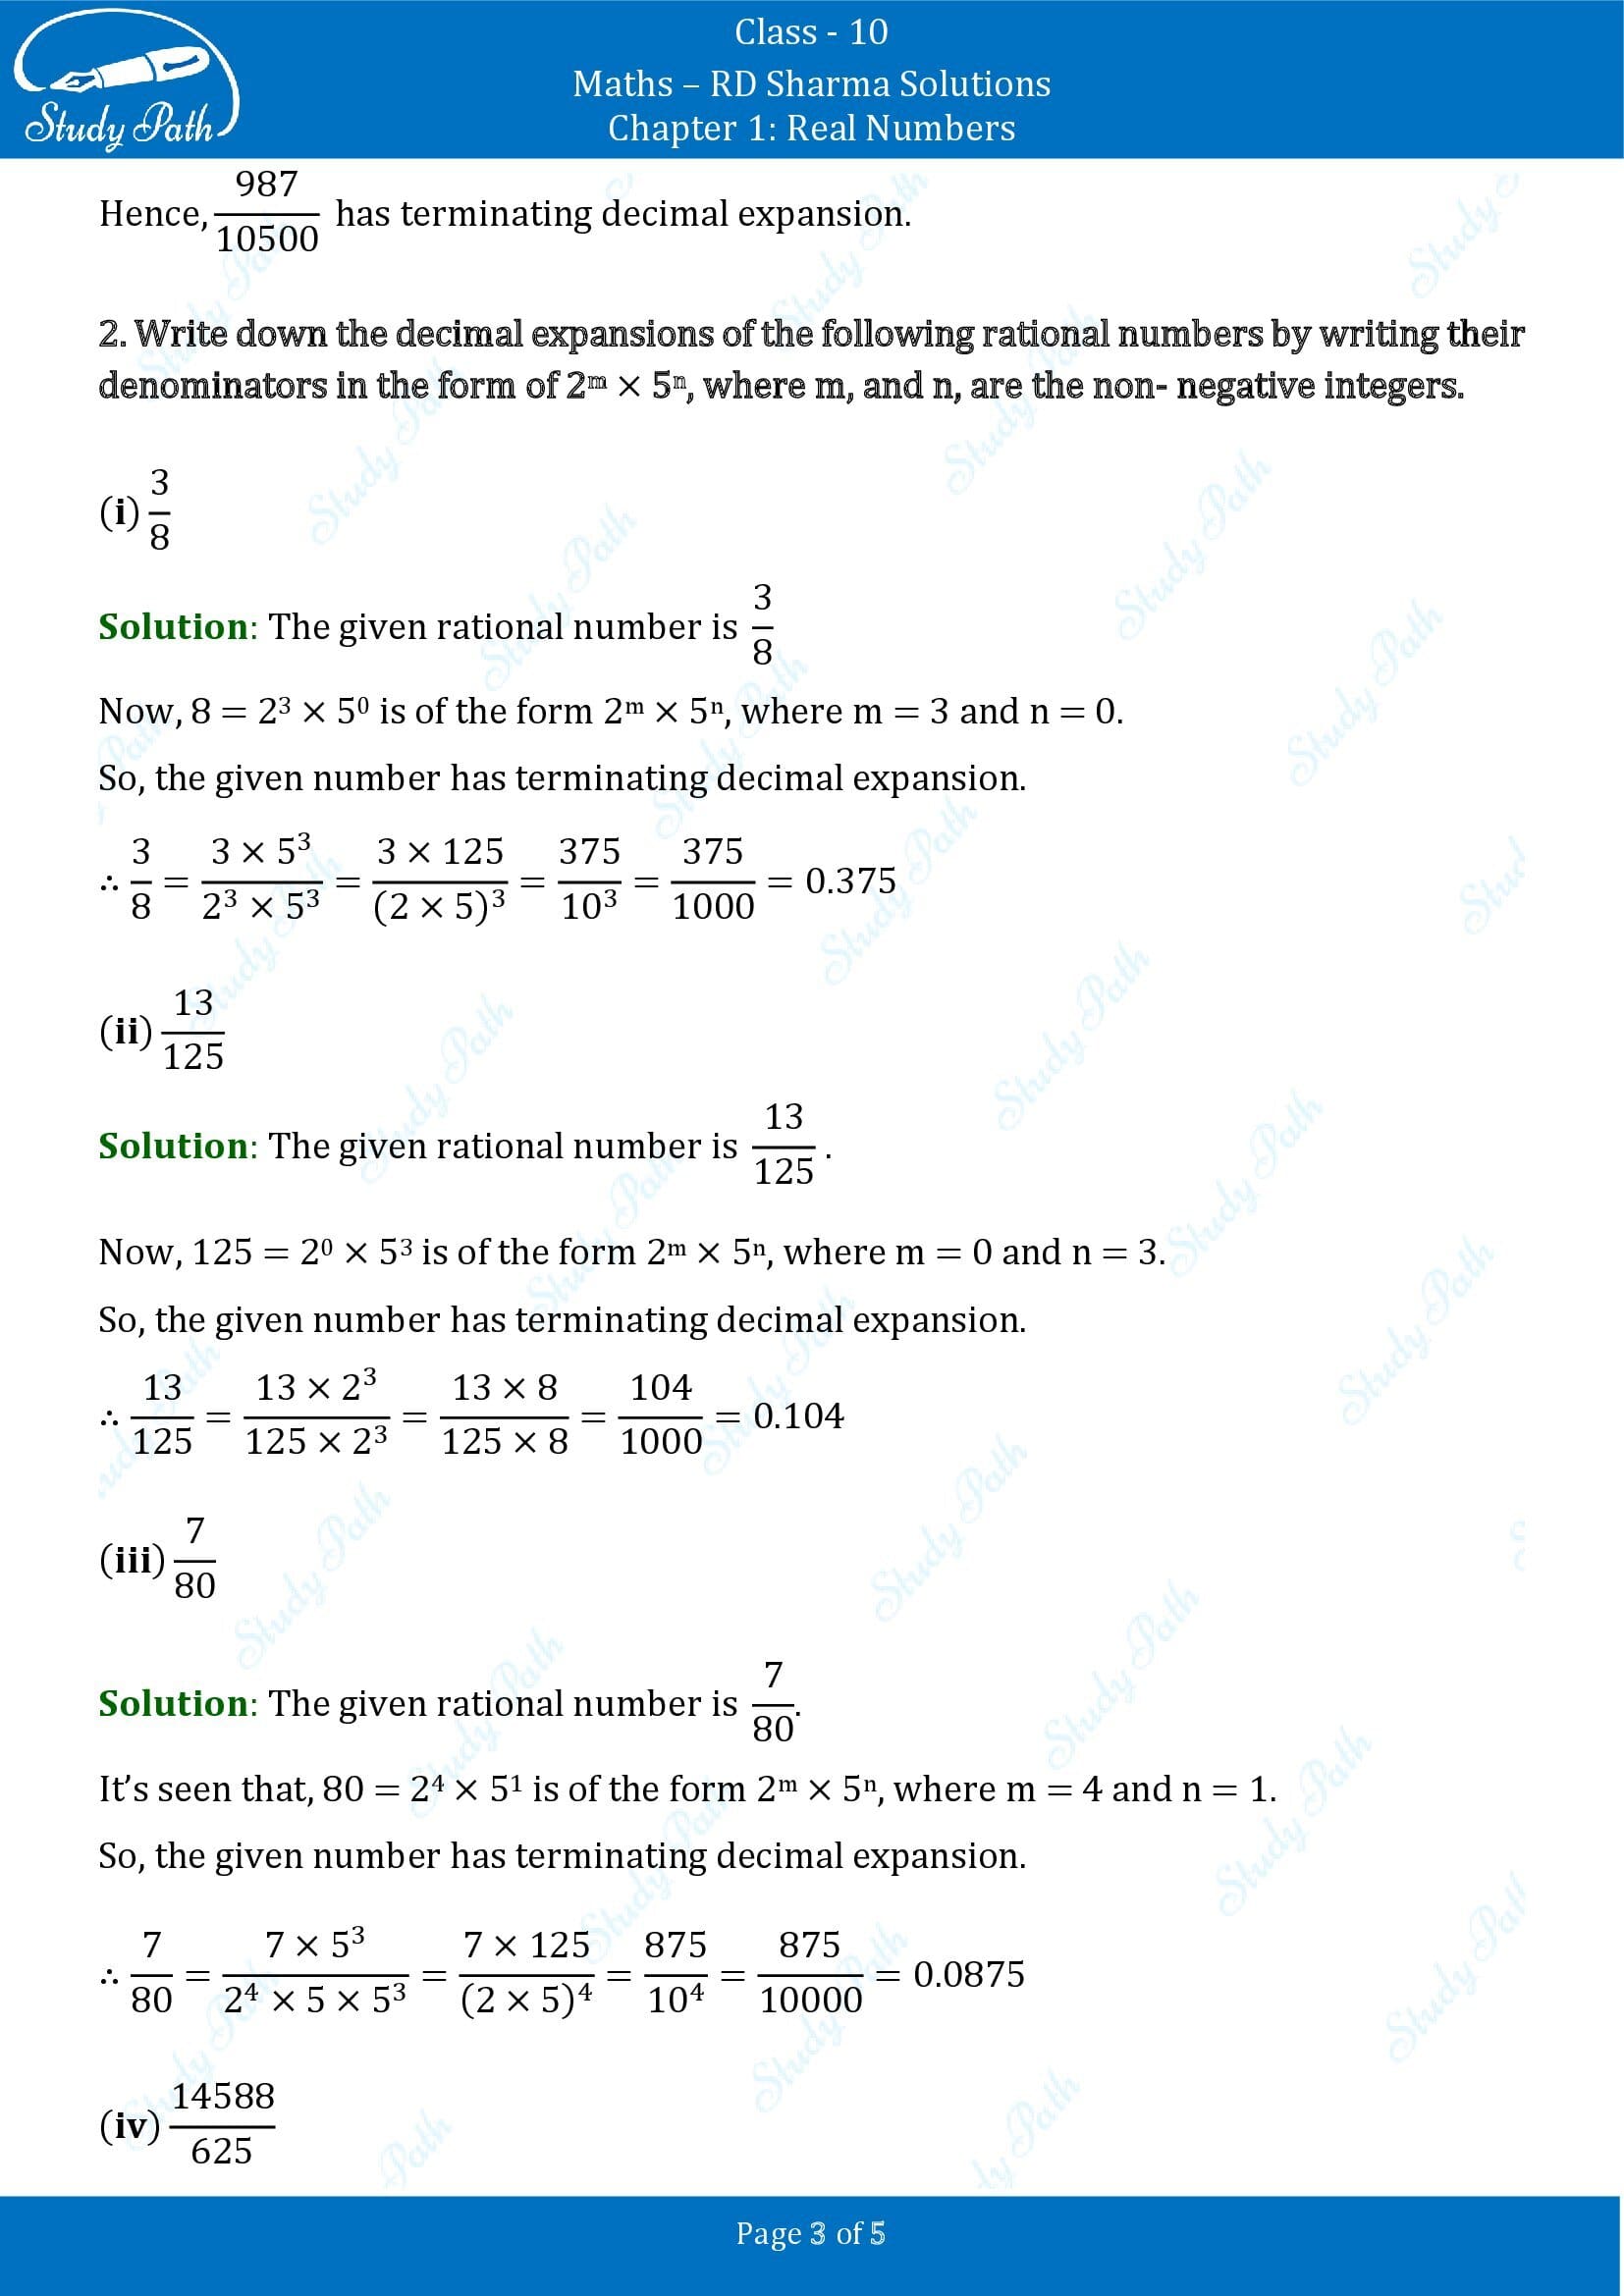 RD Sharma Solutions Class 10 Chapter 1 Real Numbers Exercise 1.6 00003